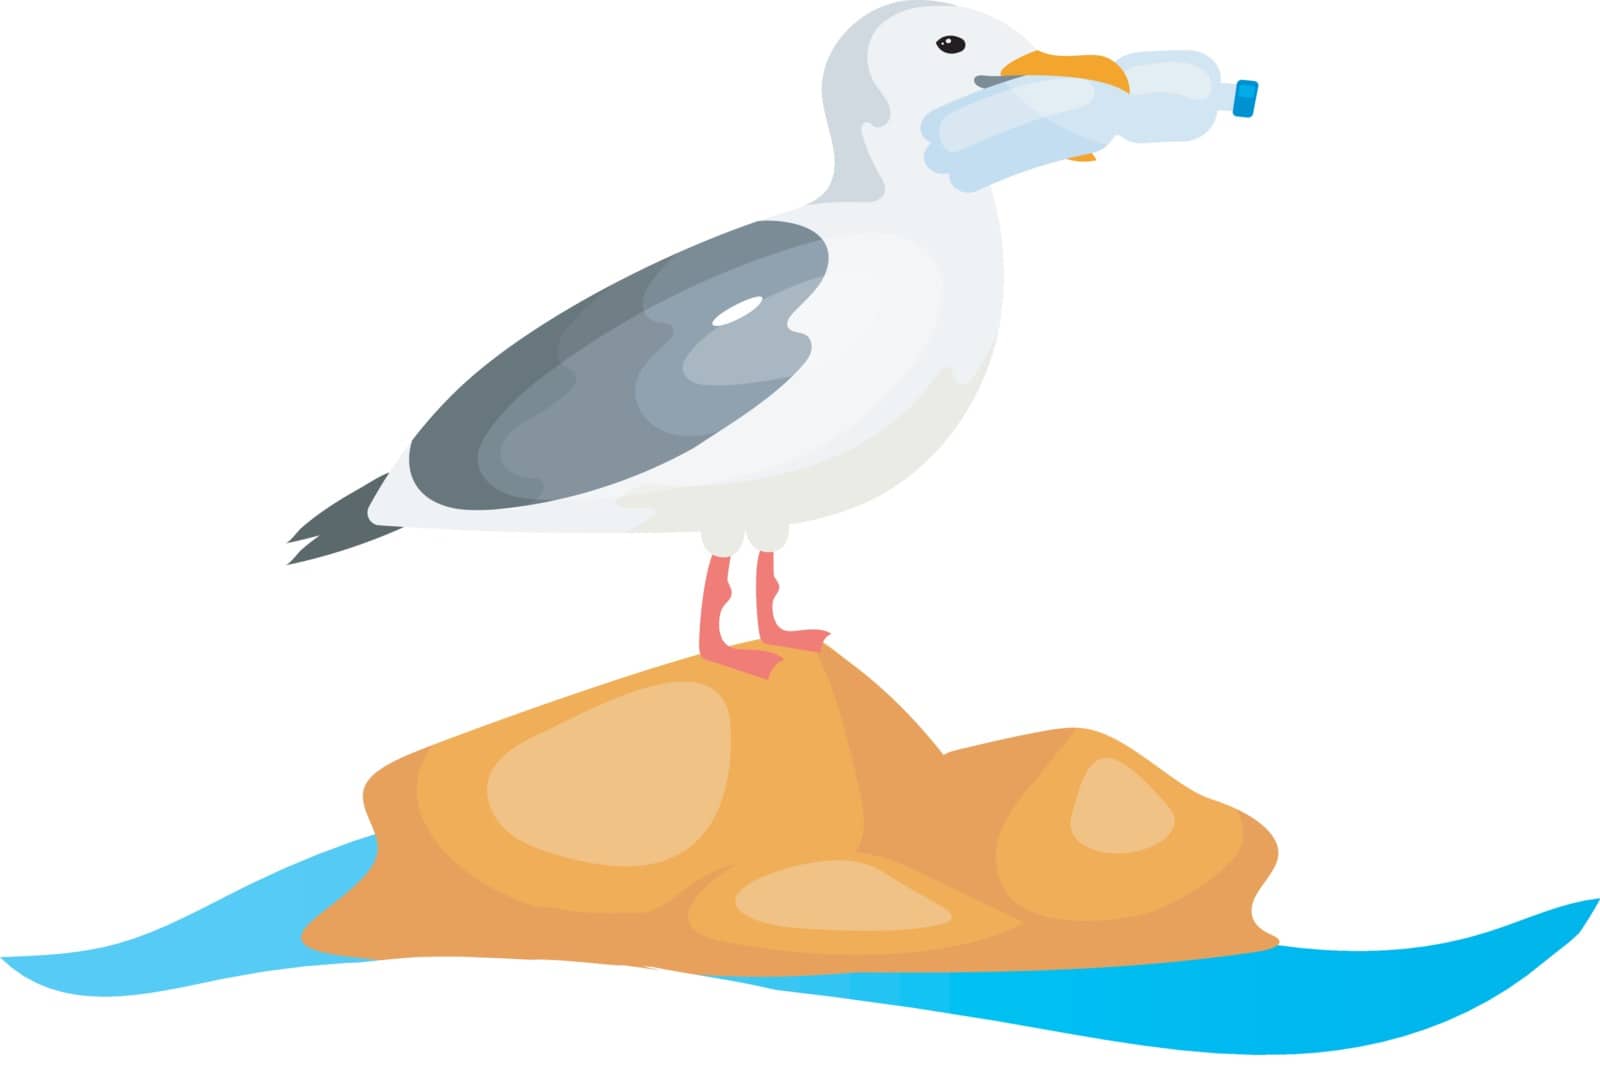 Seagull with plastic bottle in beak flat concept icon. Plastic pollution in ocean problem. Bird eating disposable container sticker, clipart. Isolated cartoon illustration on white background